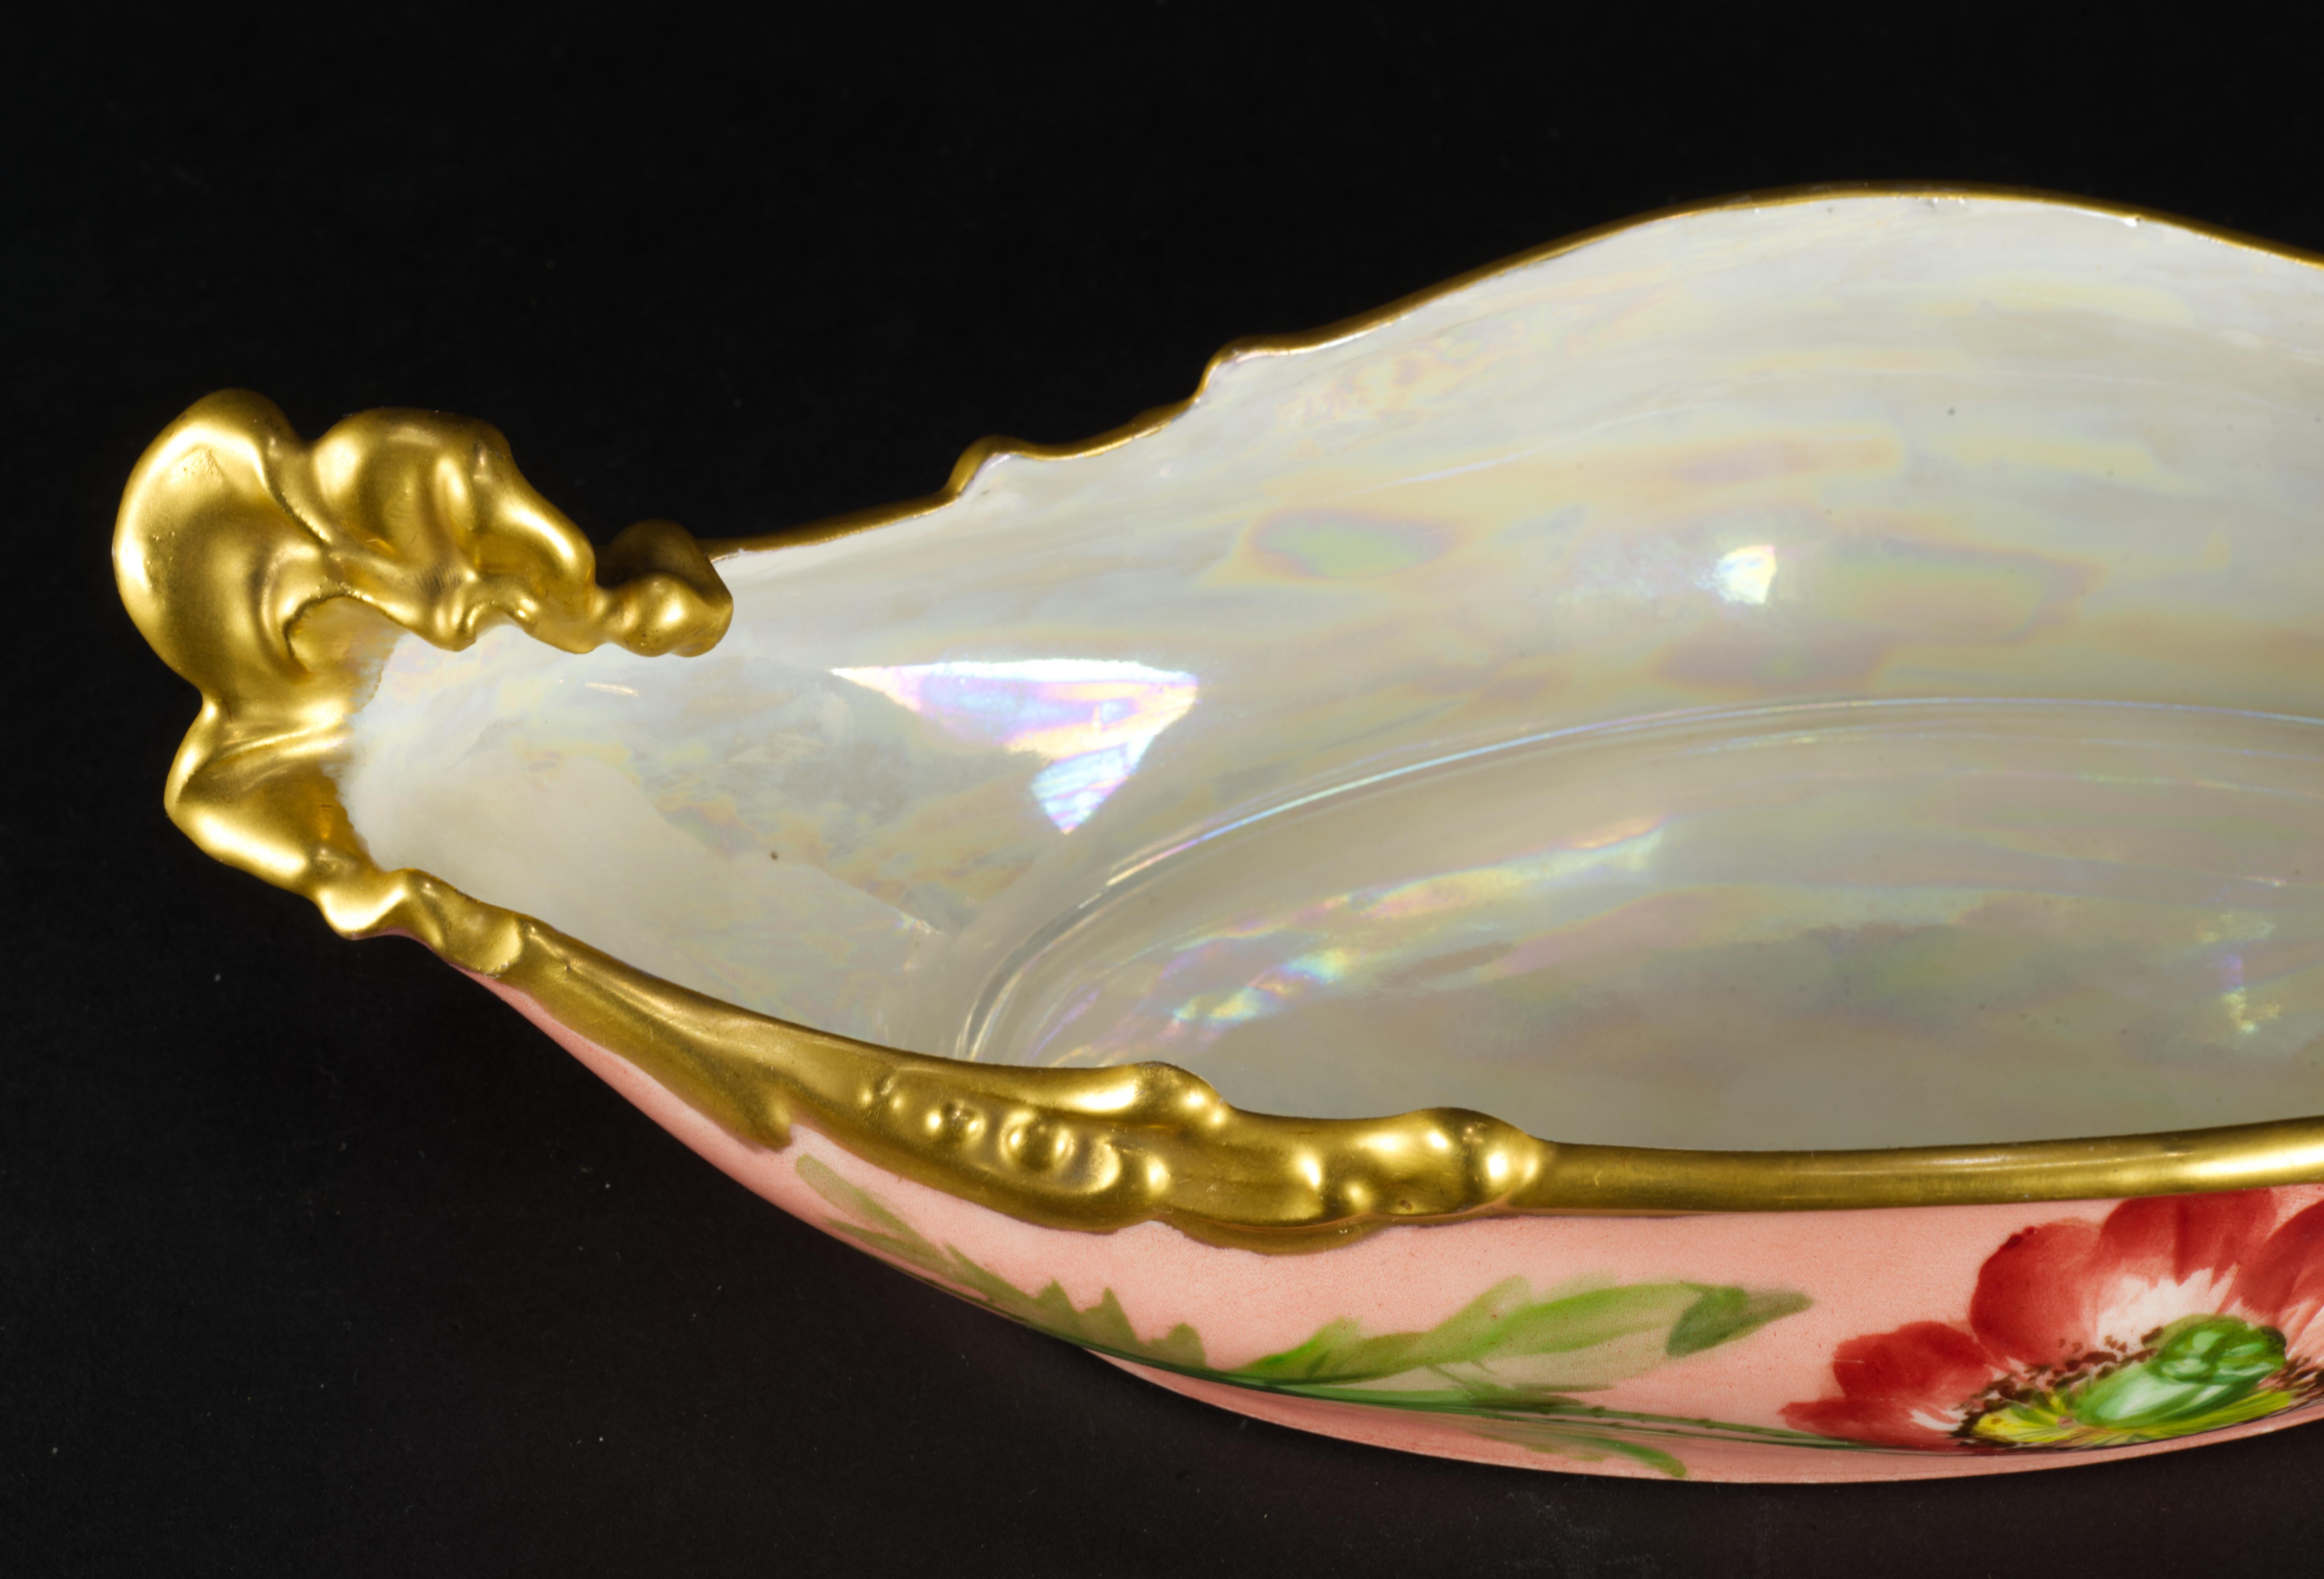 Rare Jean Pouyat Limoges France Oval Hand-painted Porcelain Ravier Bowl, 1926 For Sale 1